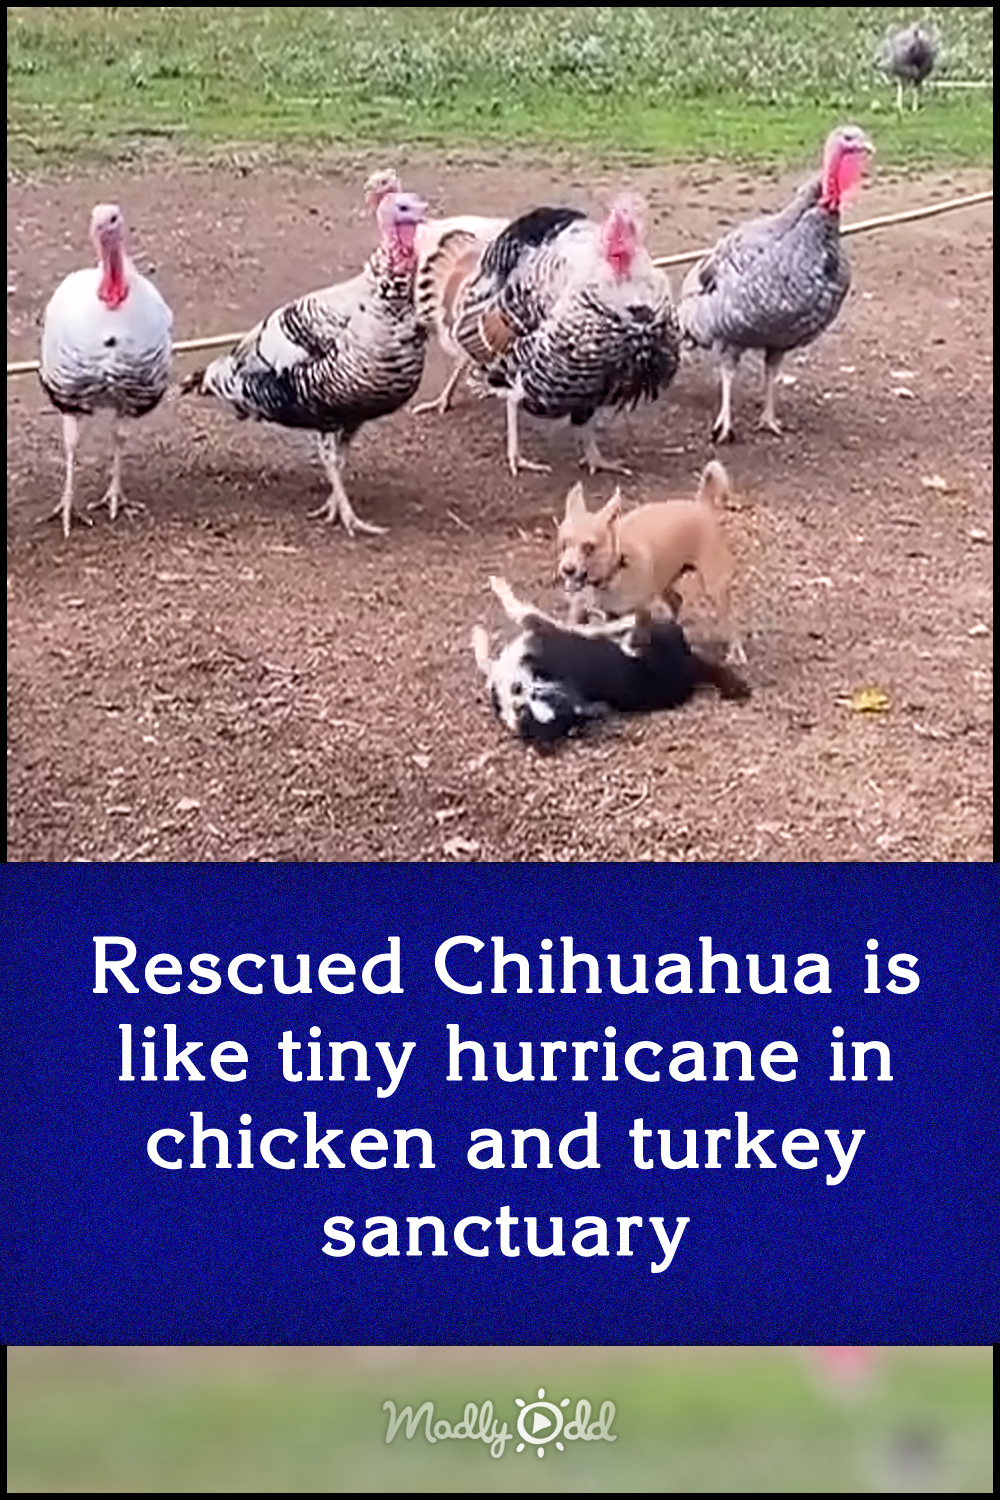 Rescued Chihuahua is like tiny hurricane in chicken and turkey sanctuary